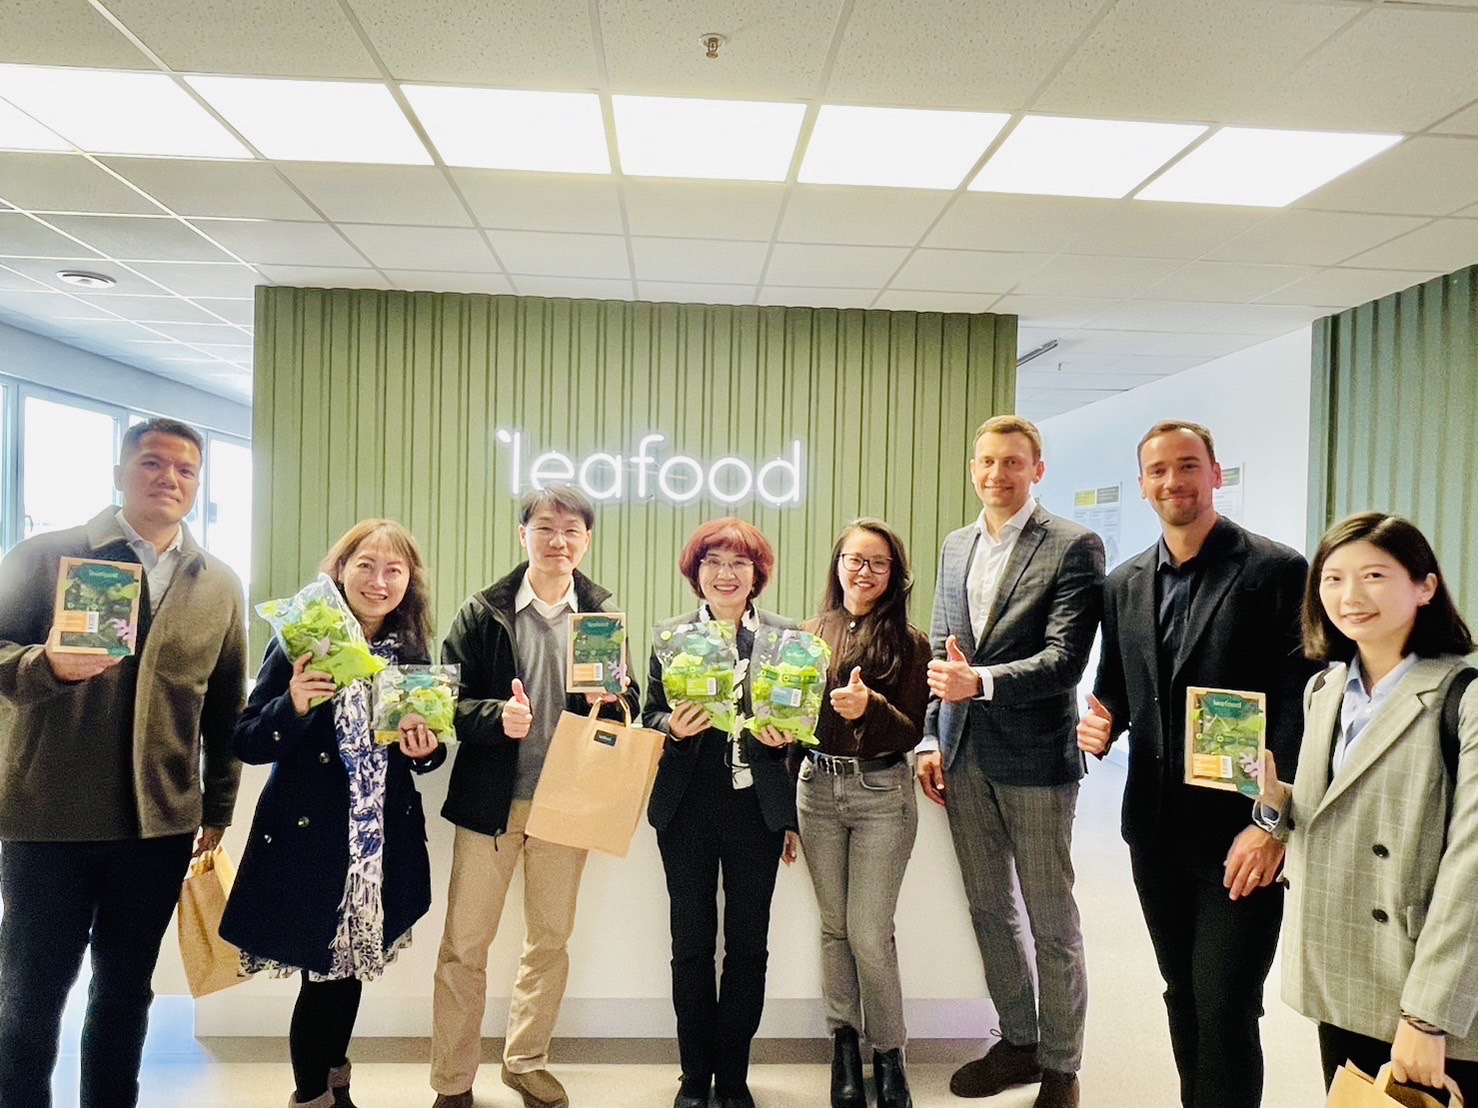 A delegation from Taiwan’s Ministry of Agriculture visited Leafood, an agribusiness that has introduced Taiwanese vertical farming technology into Lithuania.